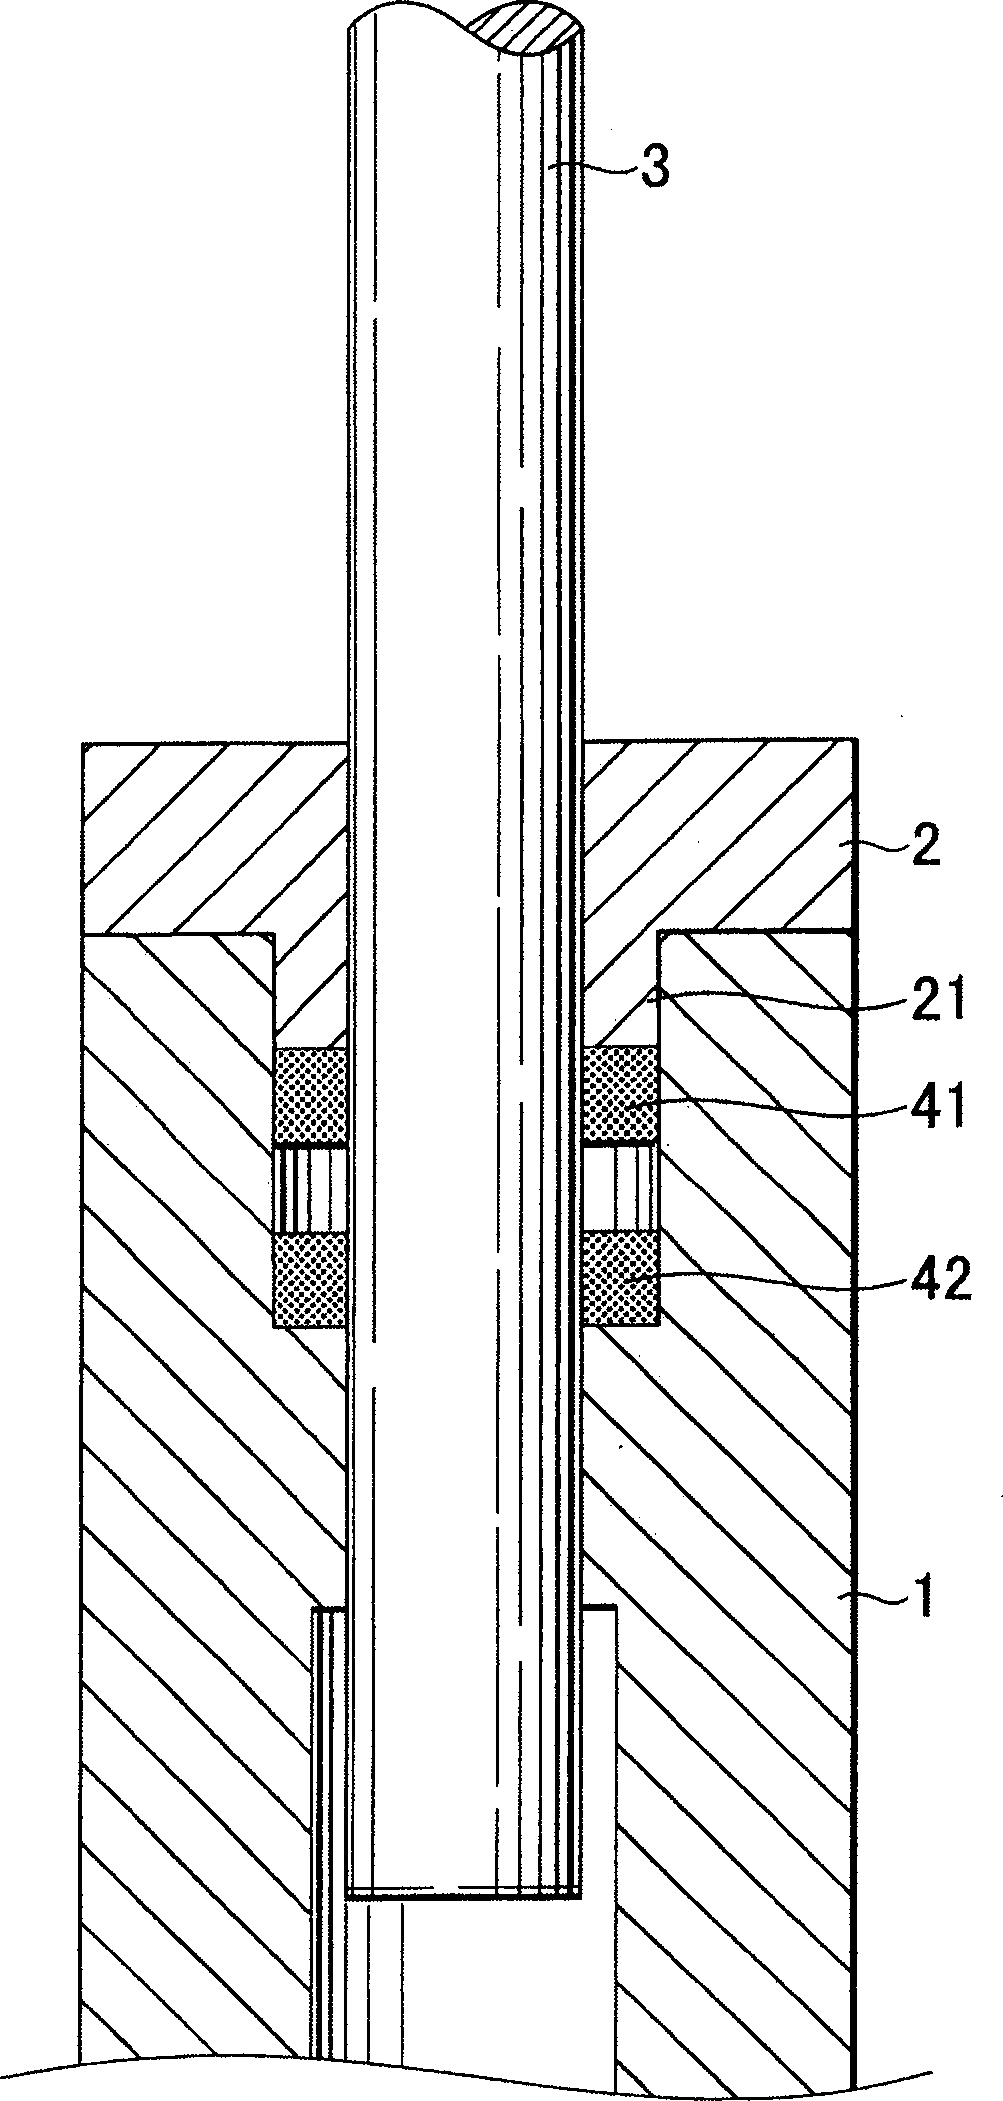 Tool holding structure